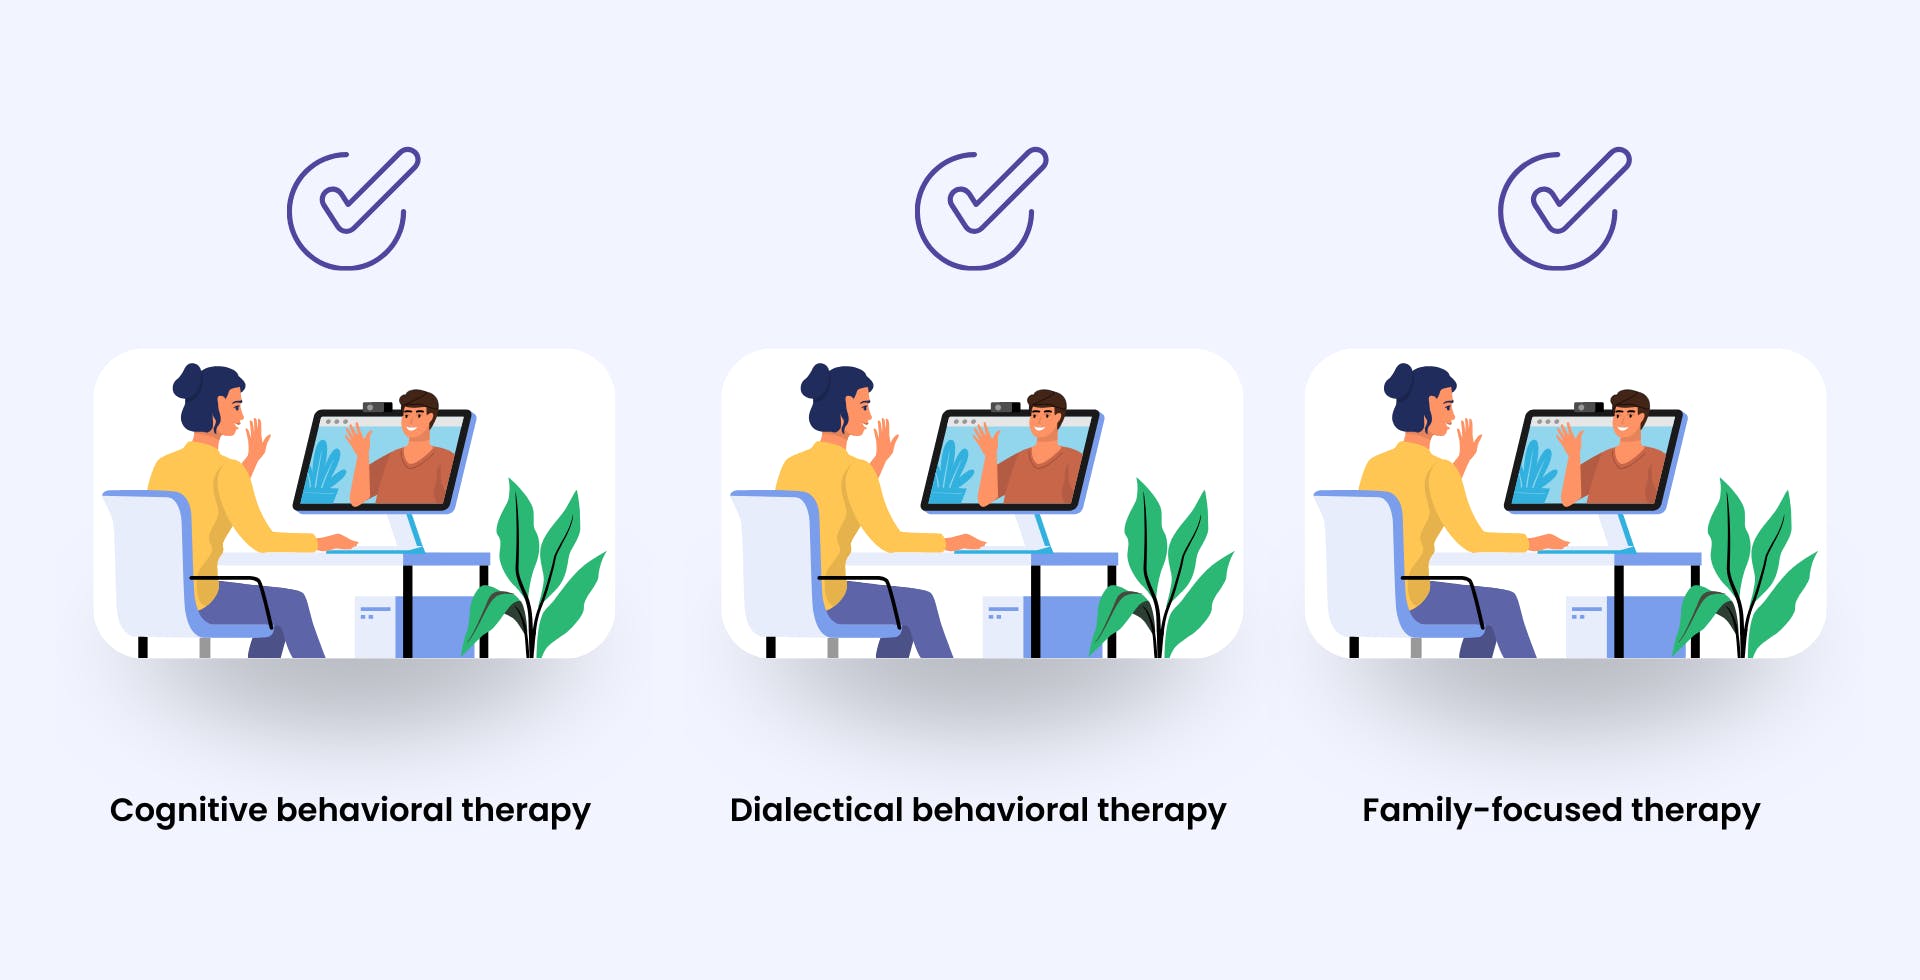  Image depicts several online therapy sessions that highlight the three most common therapy approaches to managing bipolar disorder: cognitive behavioral therapy, dialectical behavioral therapy, and family-focused therapy